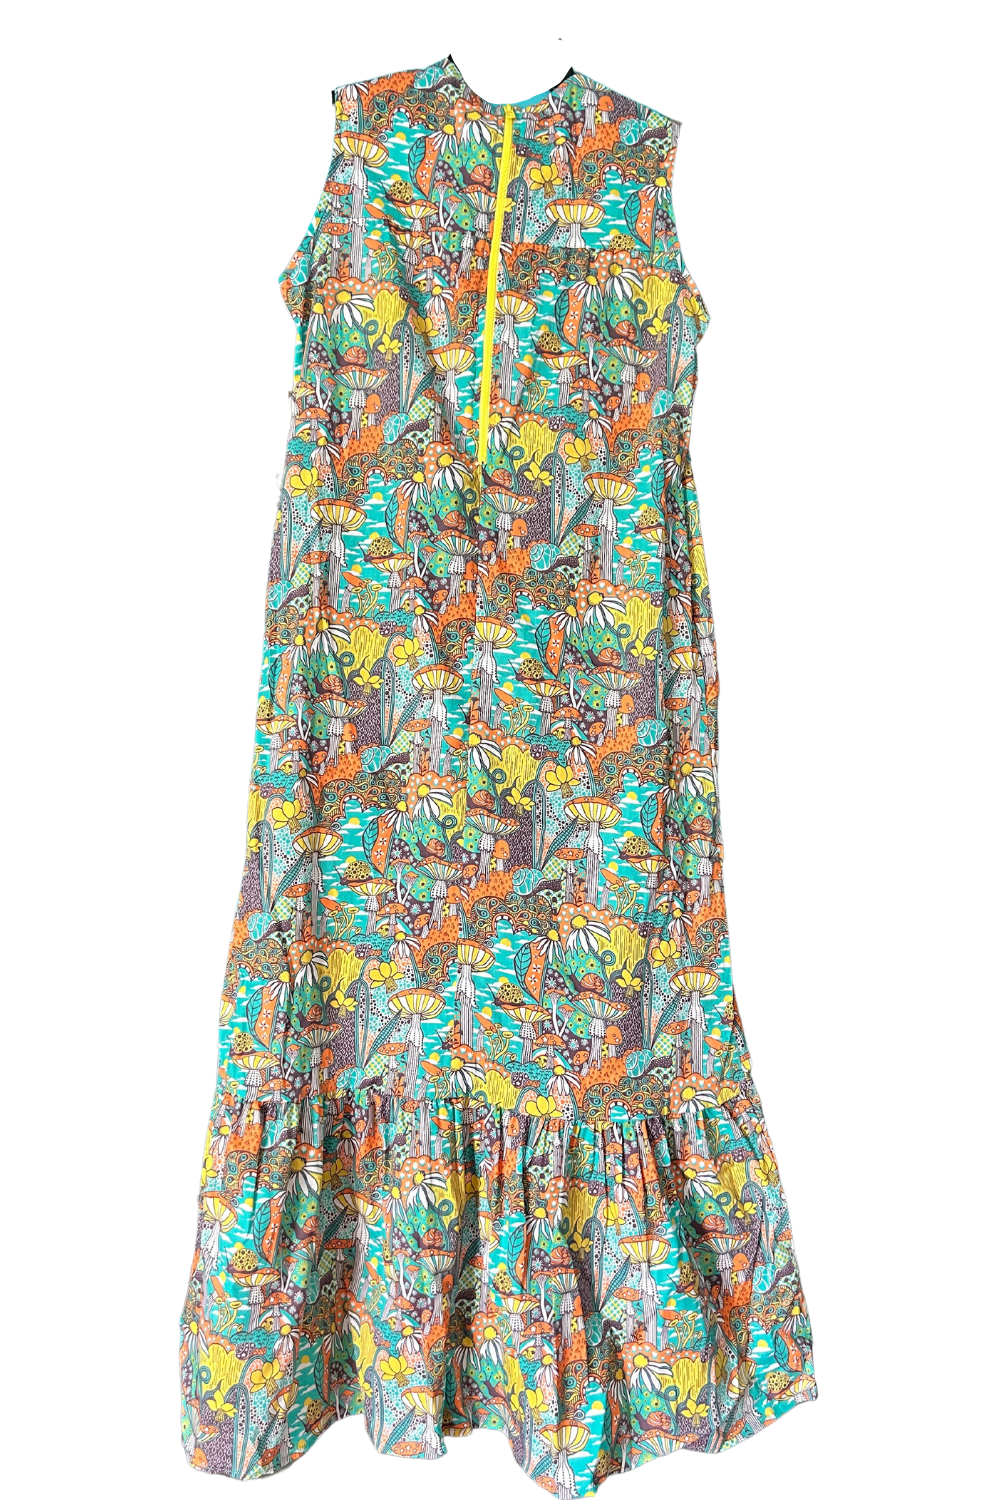 Back view of teal, orange, and yellow mushroom and flower print maxi dress with bottom ruffle